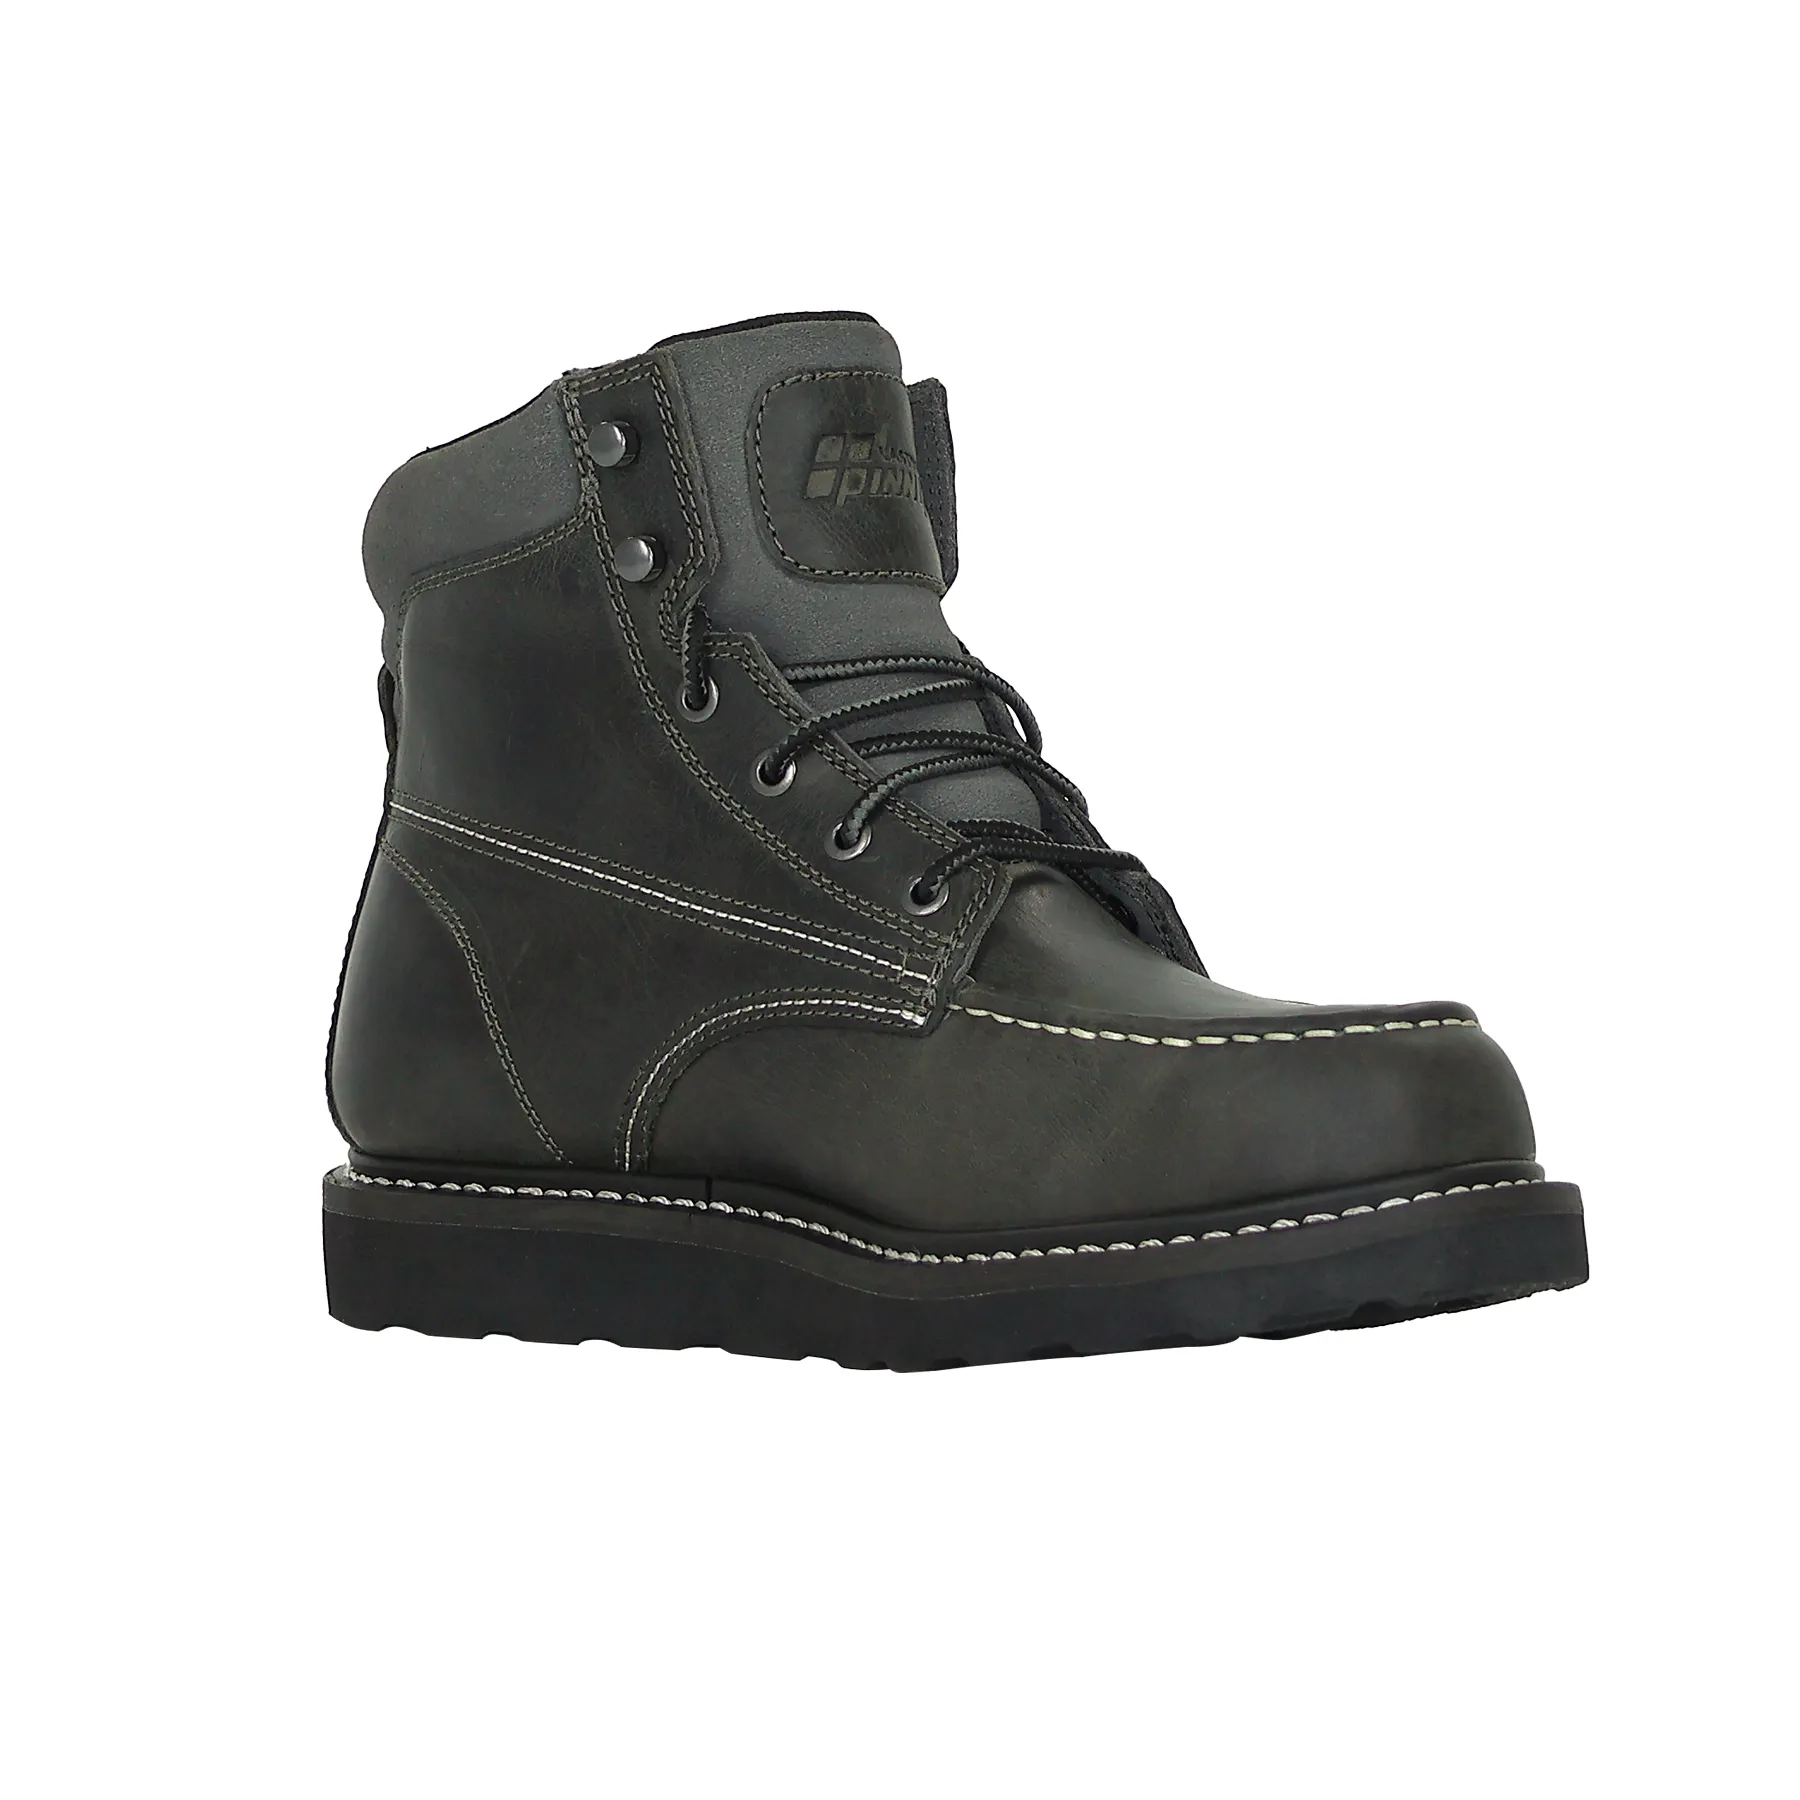 Right diagram of Elephant Goodyear Welted Boots-6 inches--Dark Grey